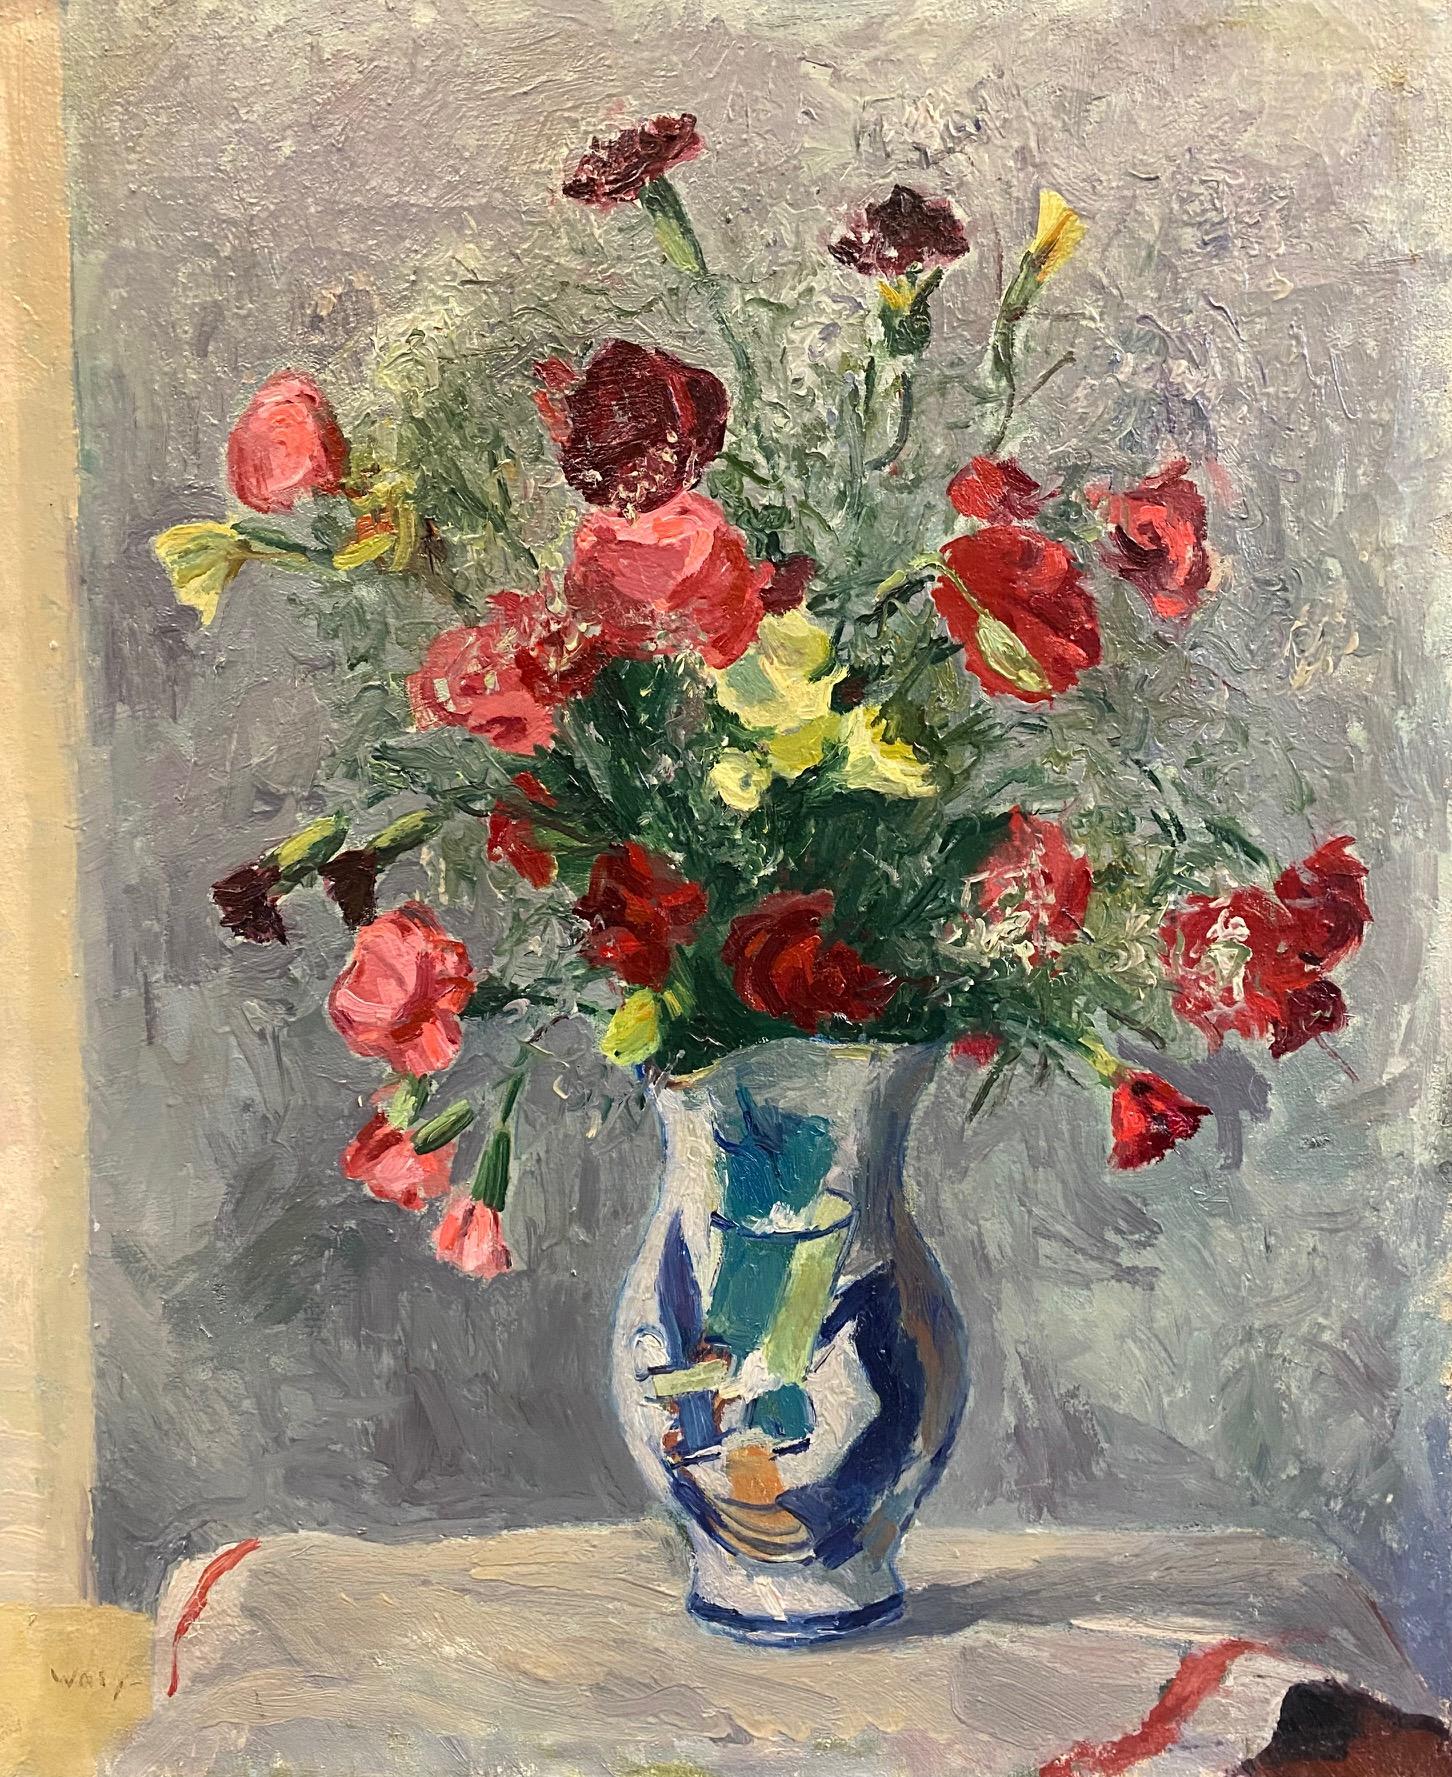 Walter Felix WUTRICH or "WALY" Still-Life Painting - Bouquet of flowers by WALY - Oil on canvas 53x44 cm